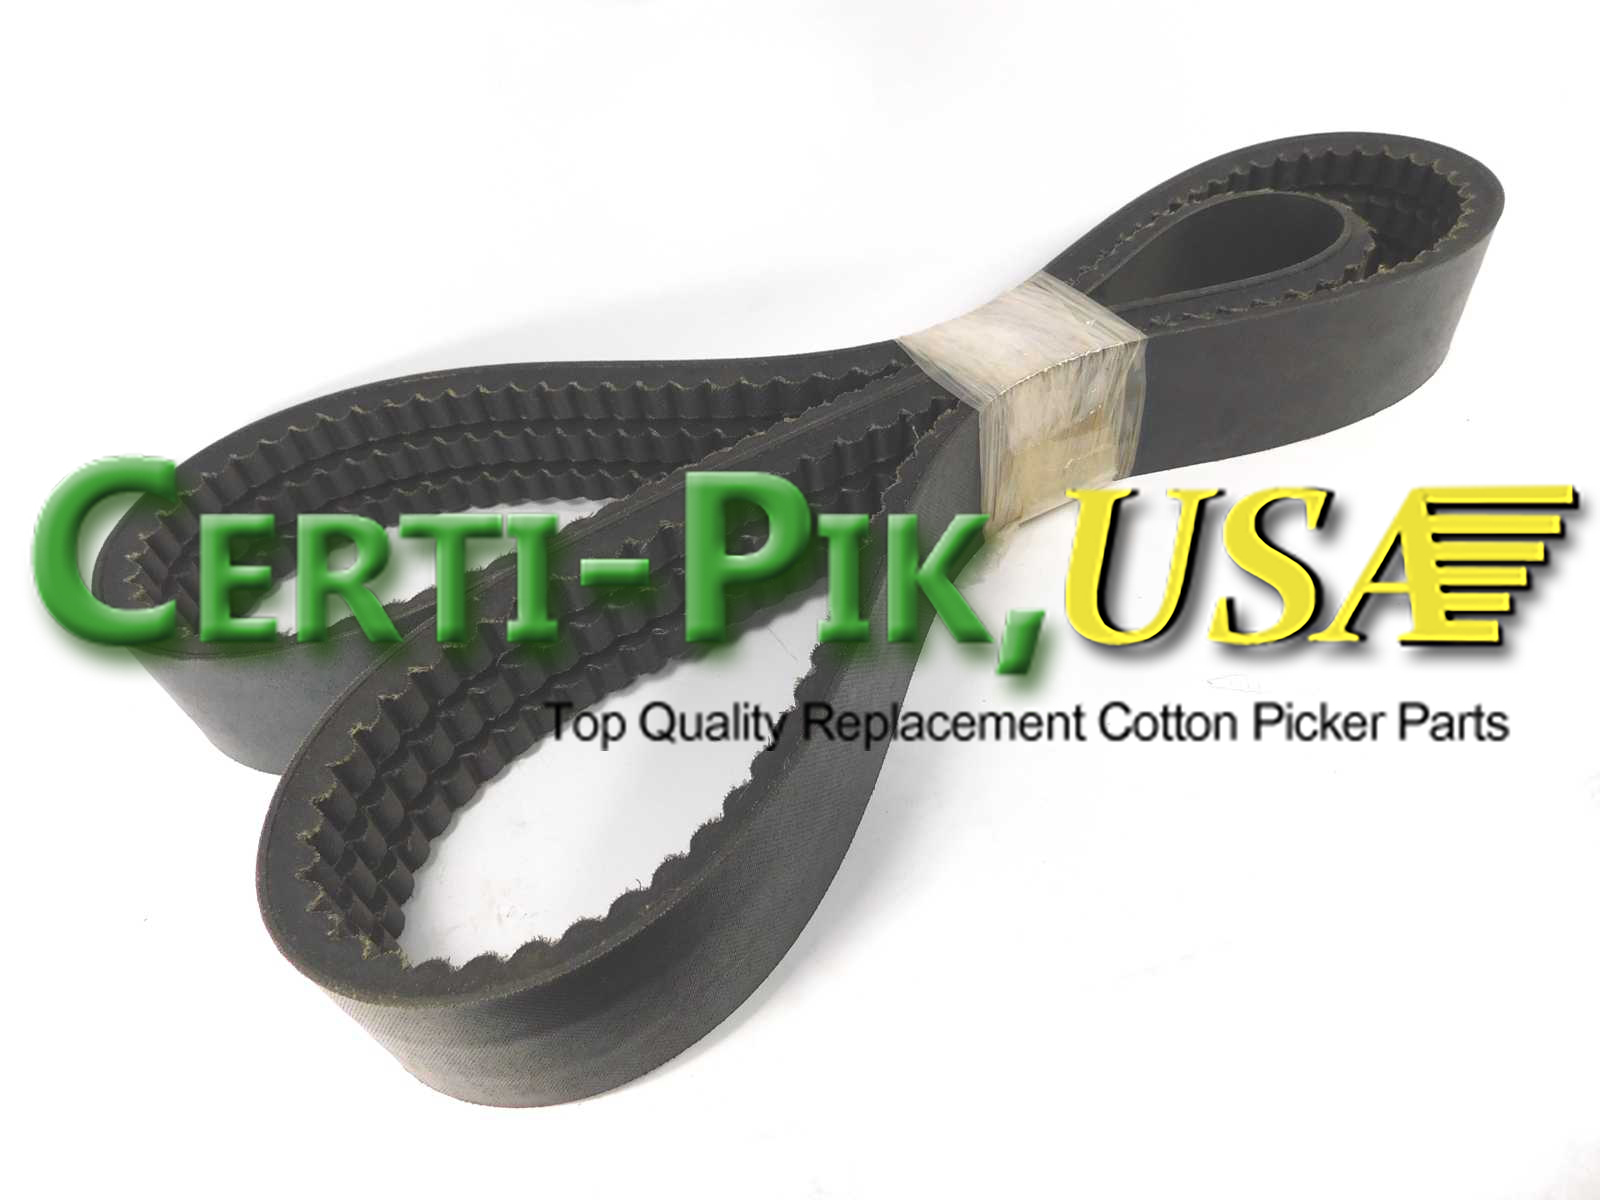 Belts: Case / IH Replacement Belts - 1822 Thru 635 Mod Exp 84144544 (B4144544) for Sale